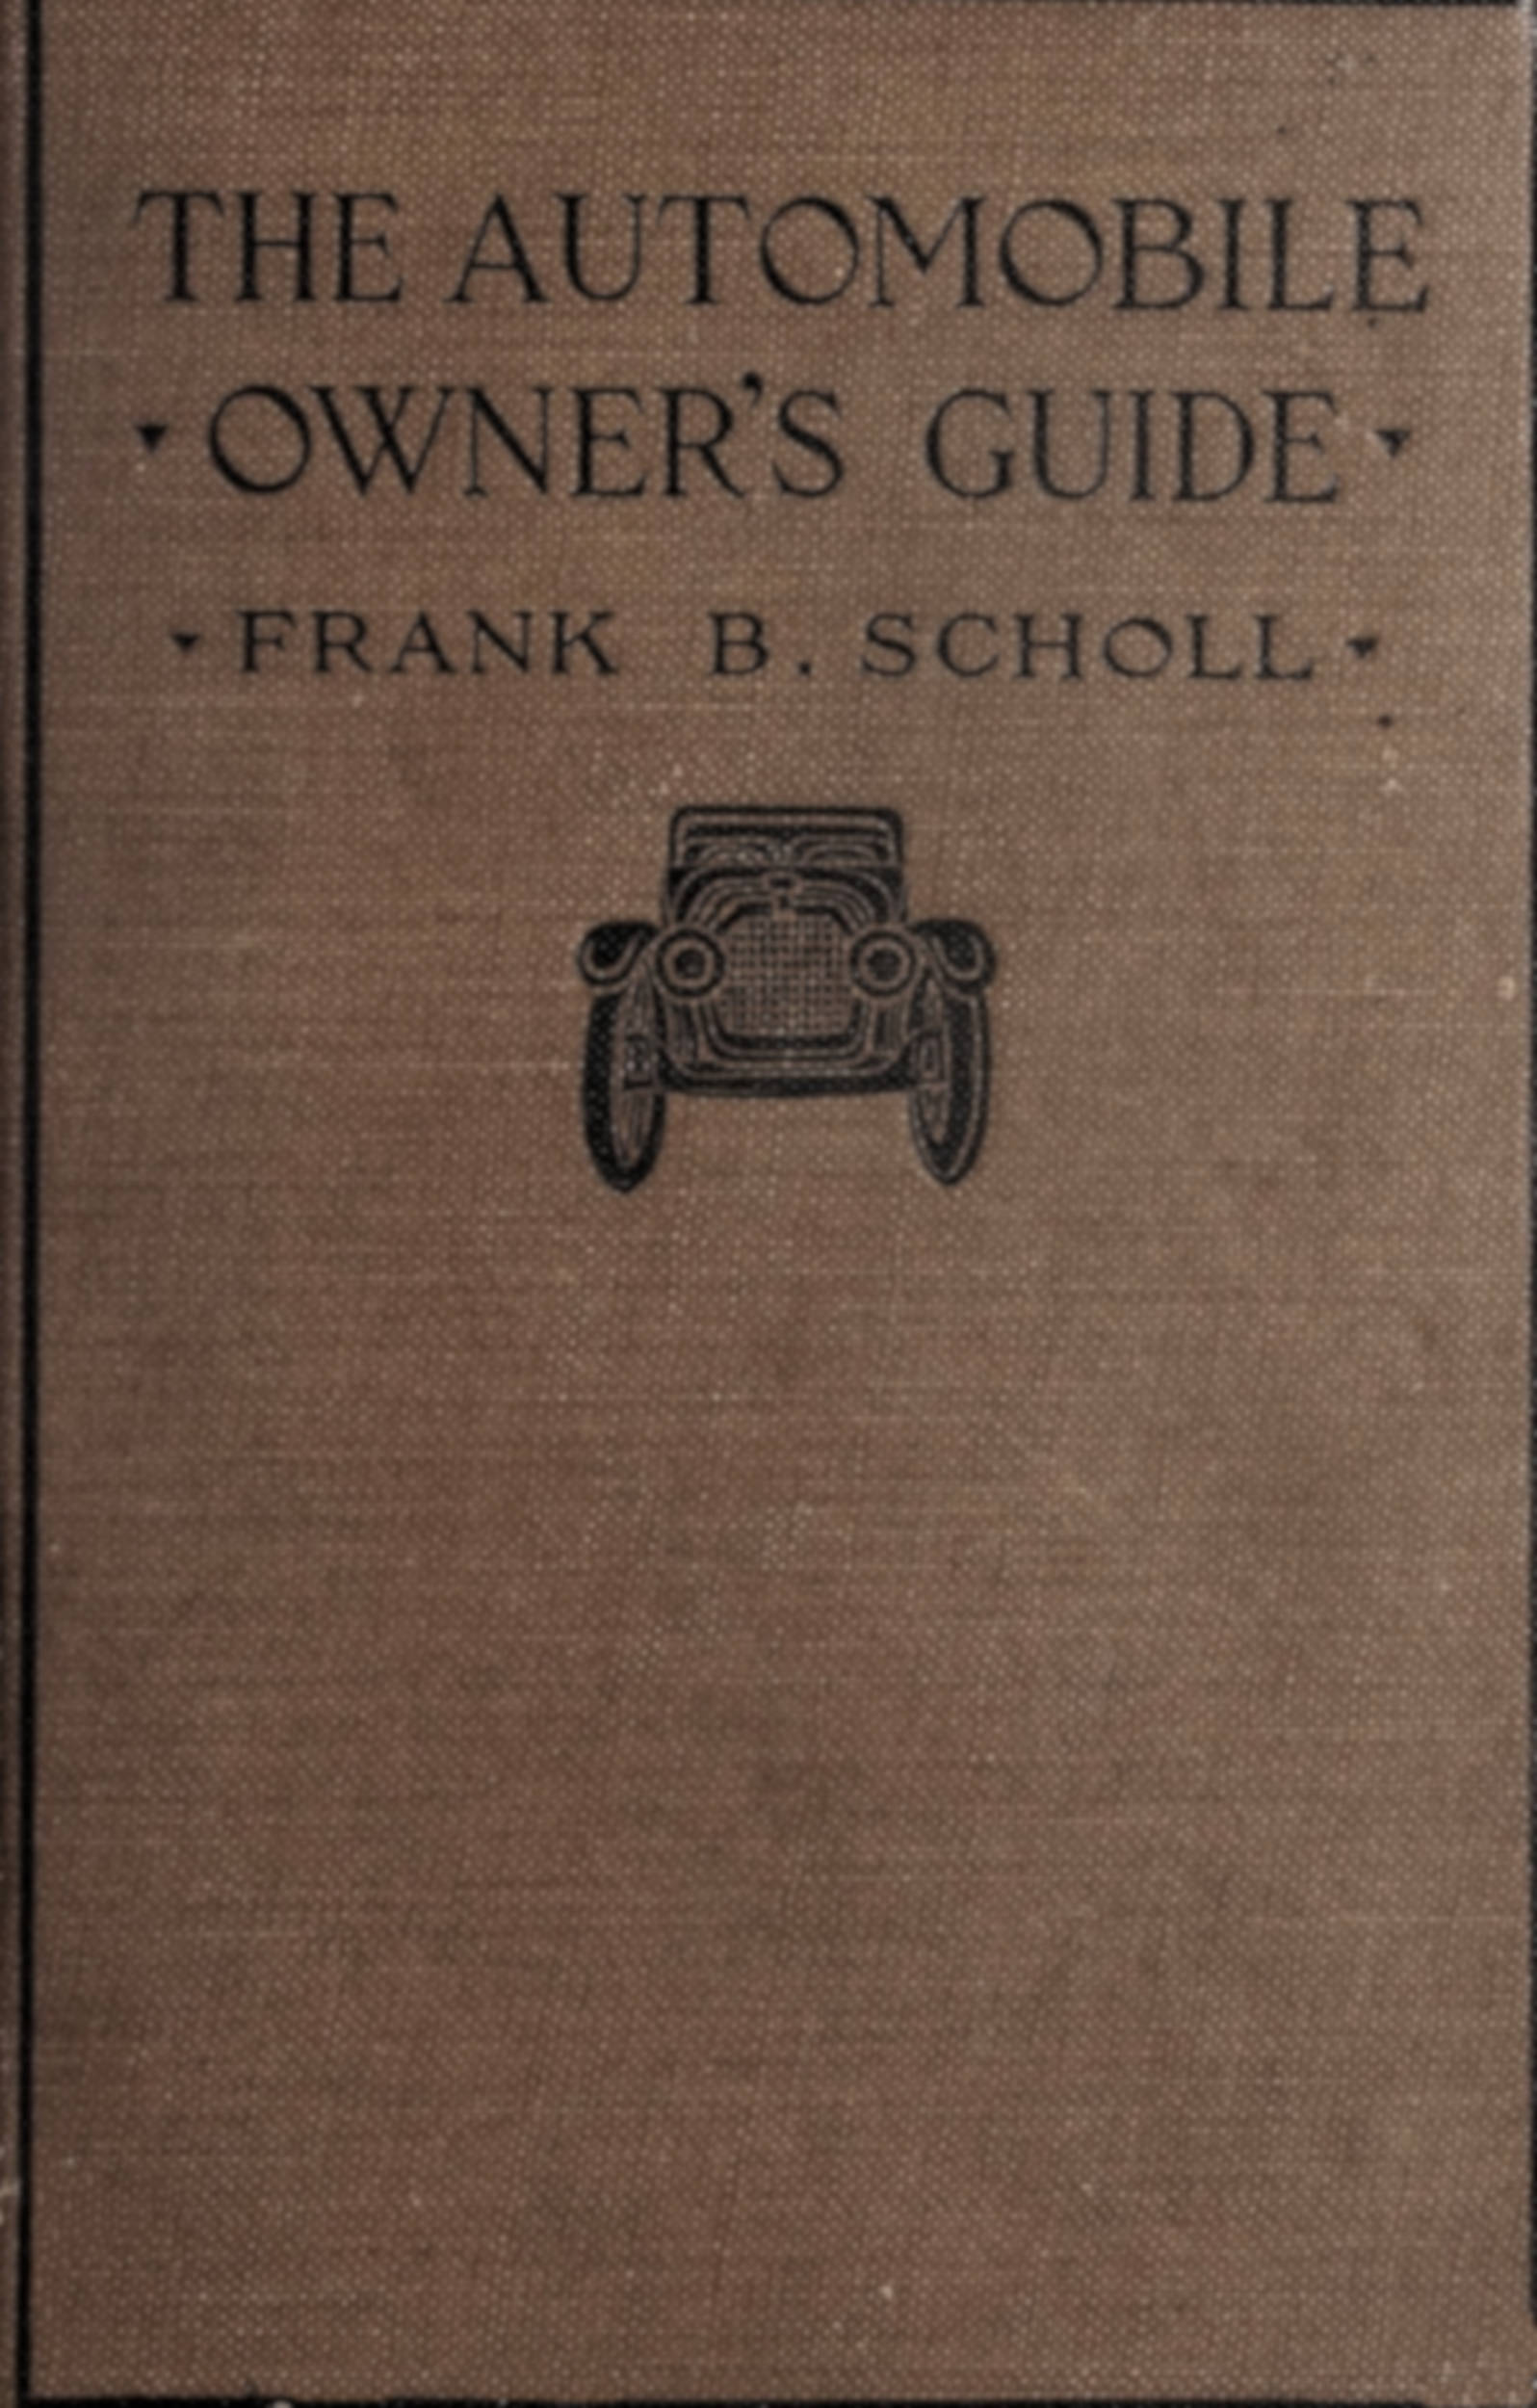 The Automobile Owner's Guide, by Frank B. Scholl—A Project Gutenberg eBook